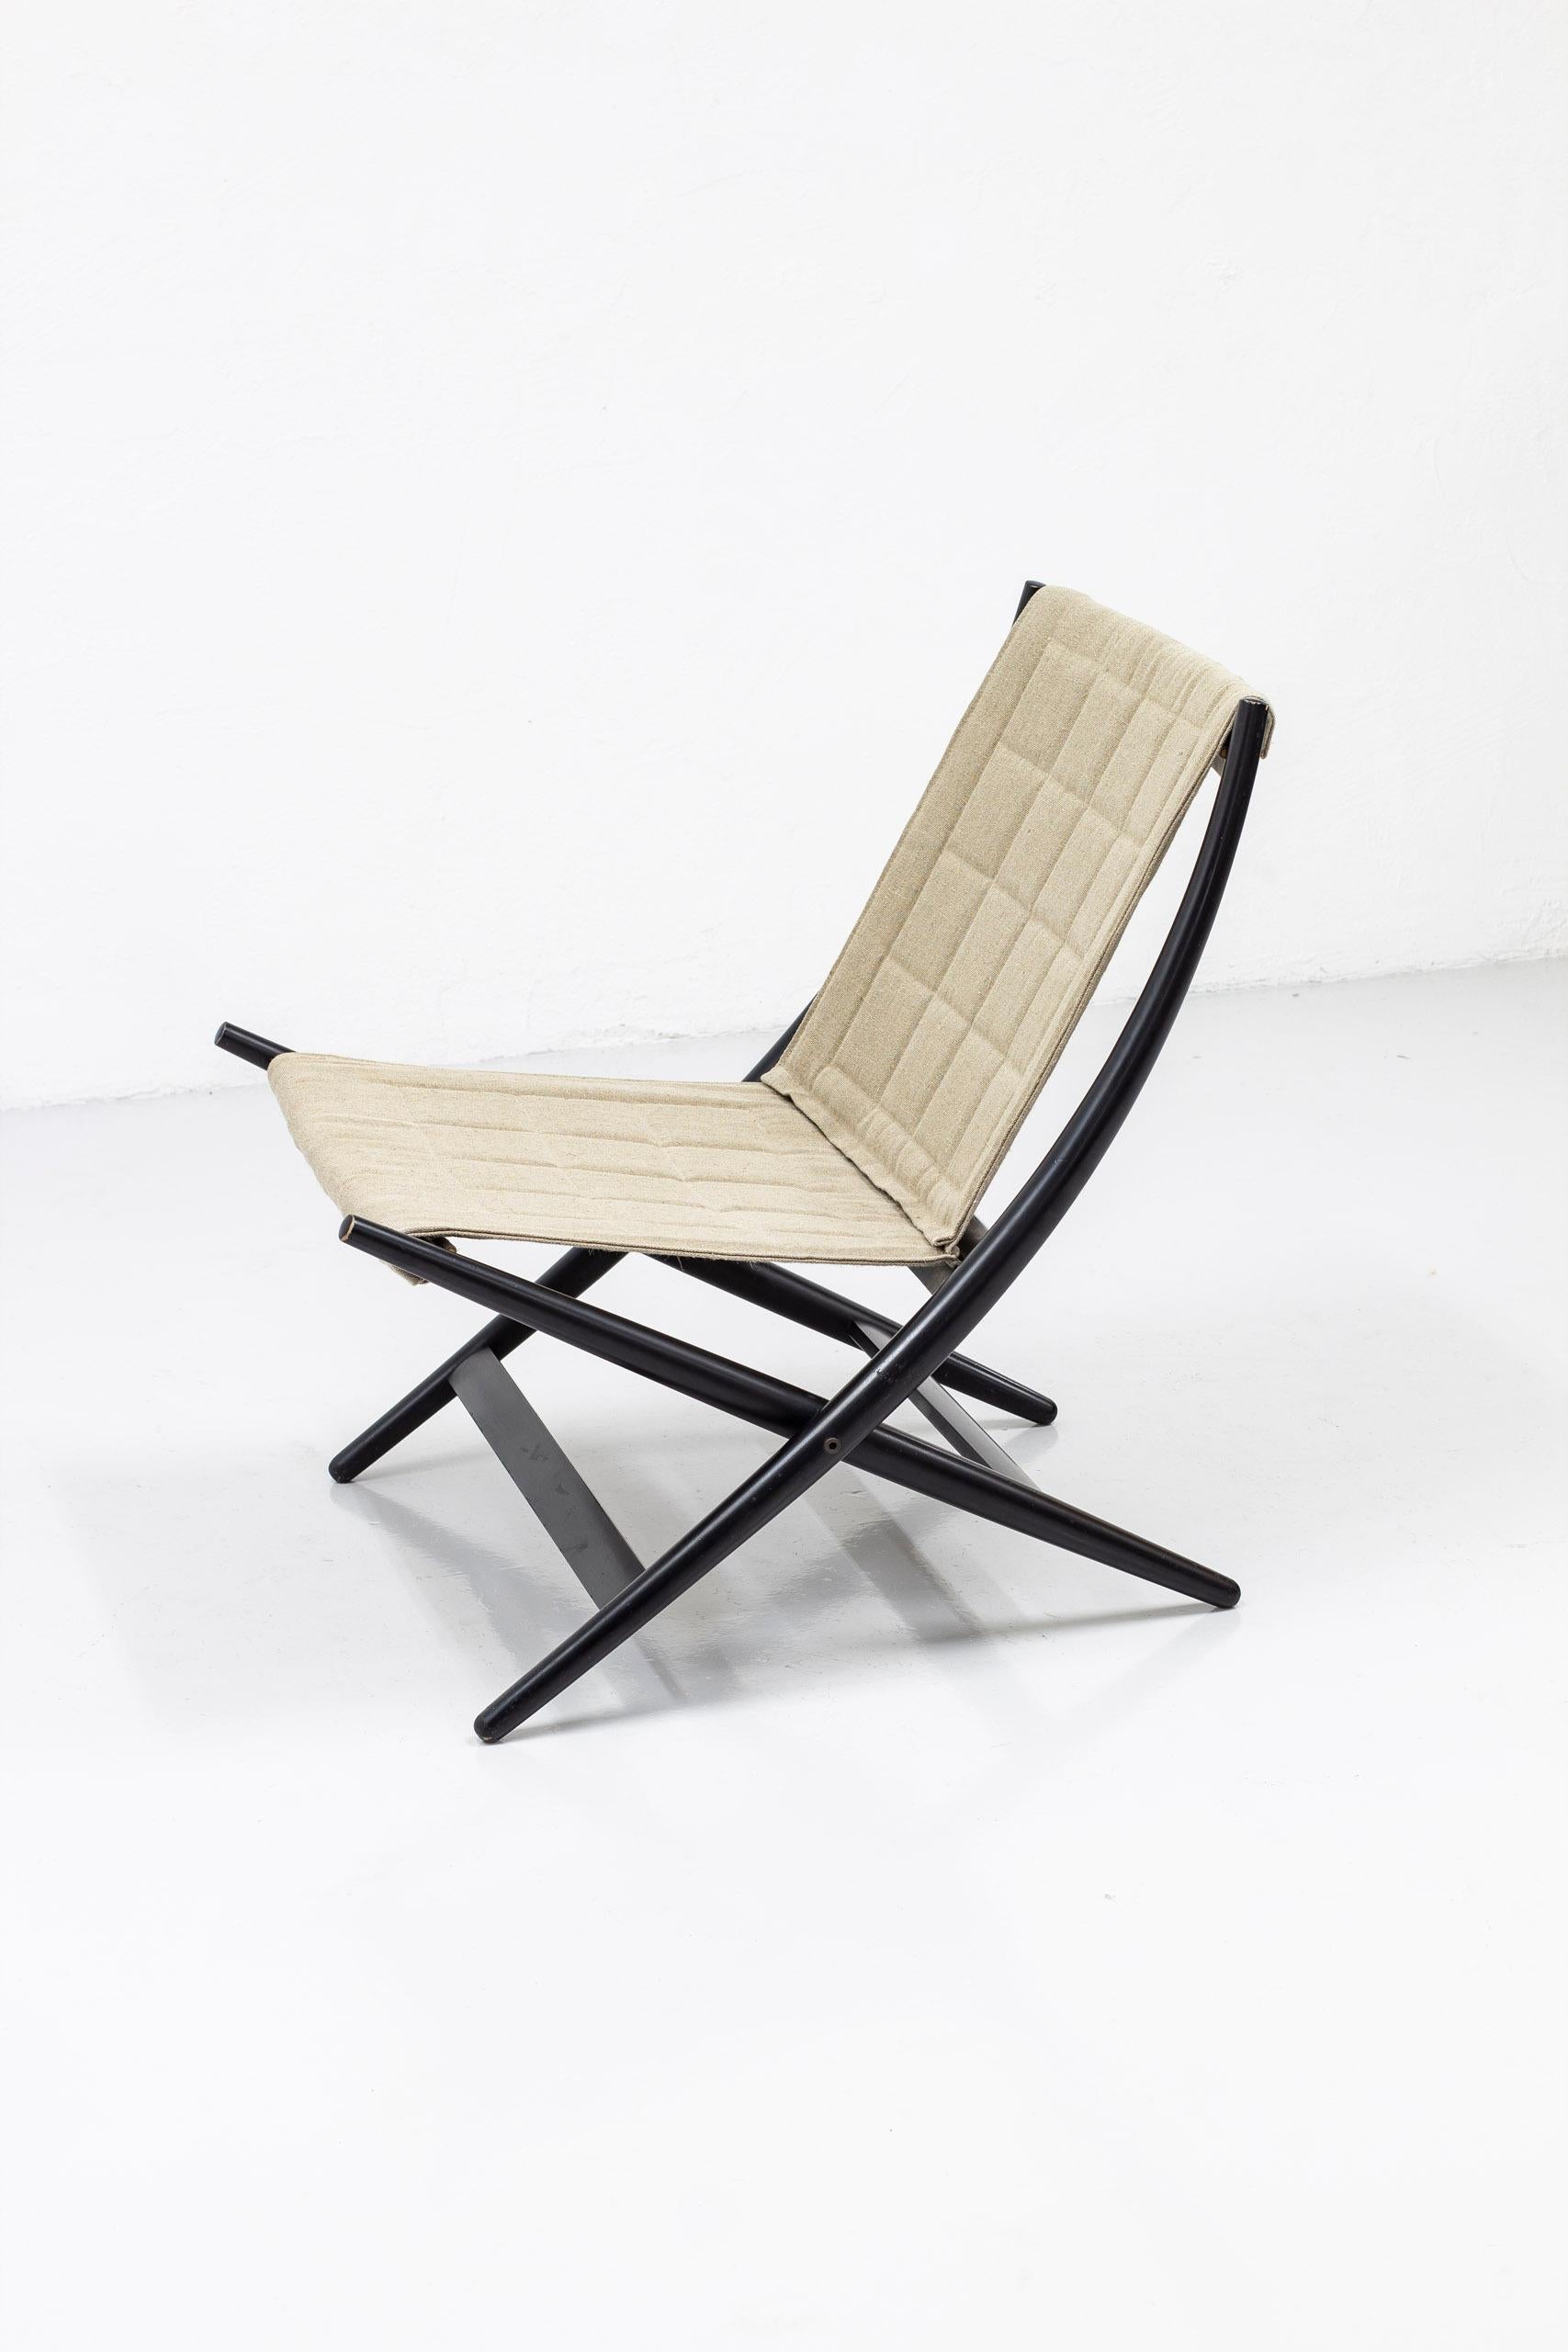 Danish folding chair designed by John Hagen in 1958. Produced by Cabinetmaker I. Christiansen in Denmark ca late 1950-1960s. Made from black lacquered beech wood with lightly padded and pattern sewn natural canvas upholstery. The upholstery is newly